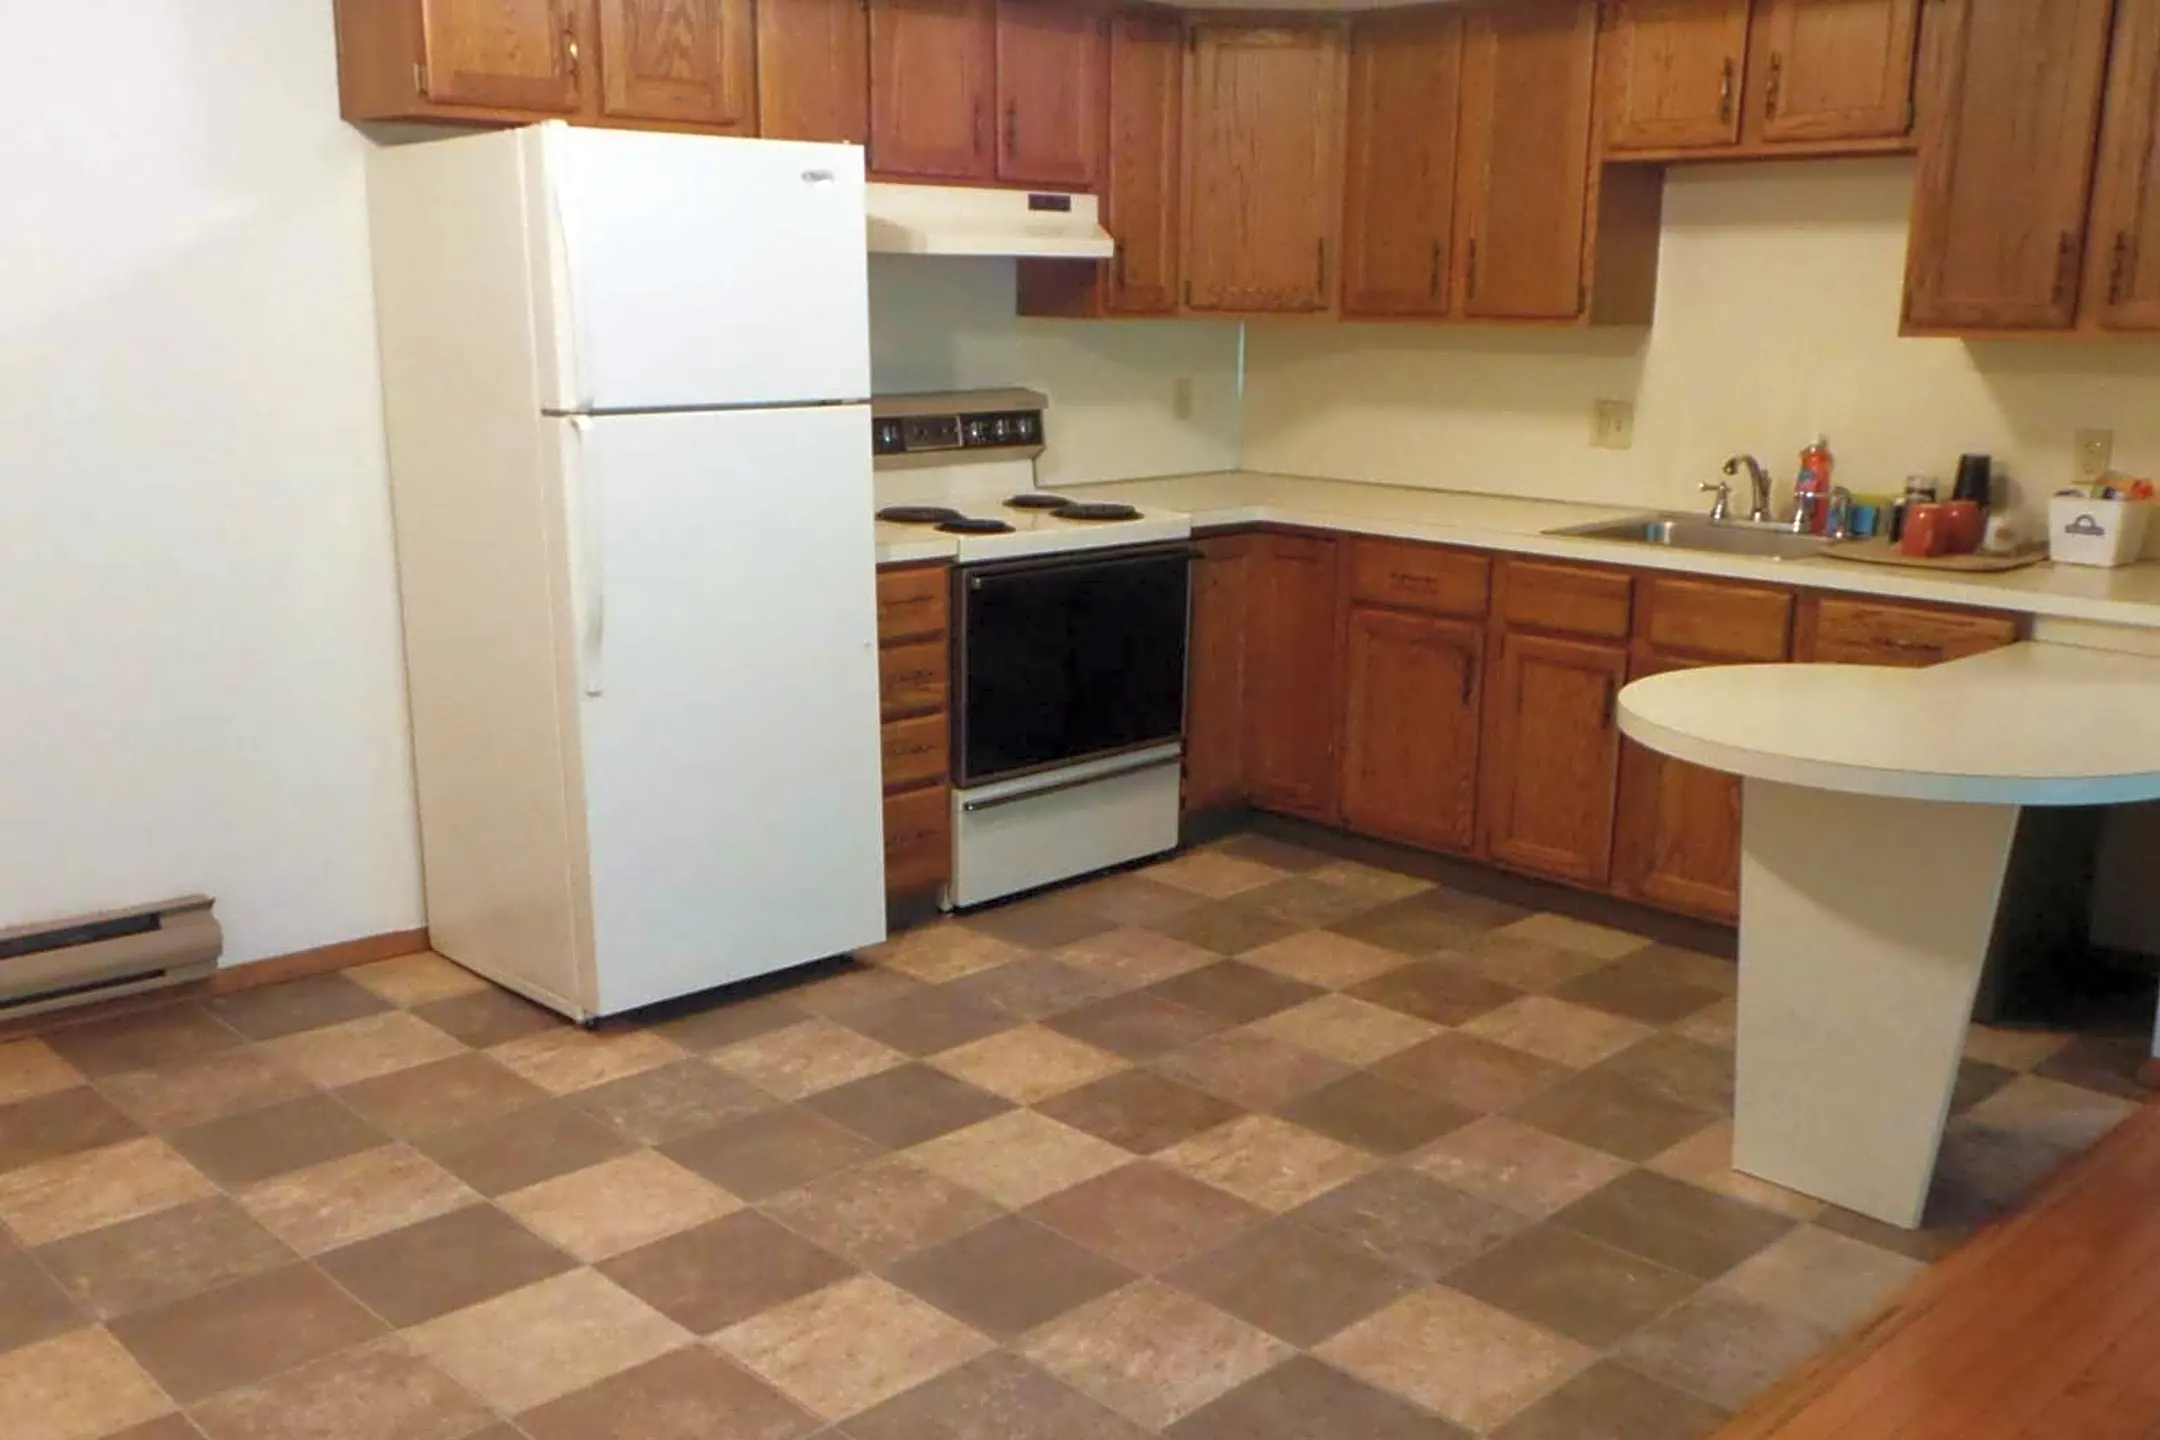 Kitchen - Lakeside Manor Apartments - East Stroudsburg, PA